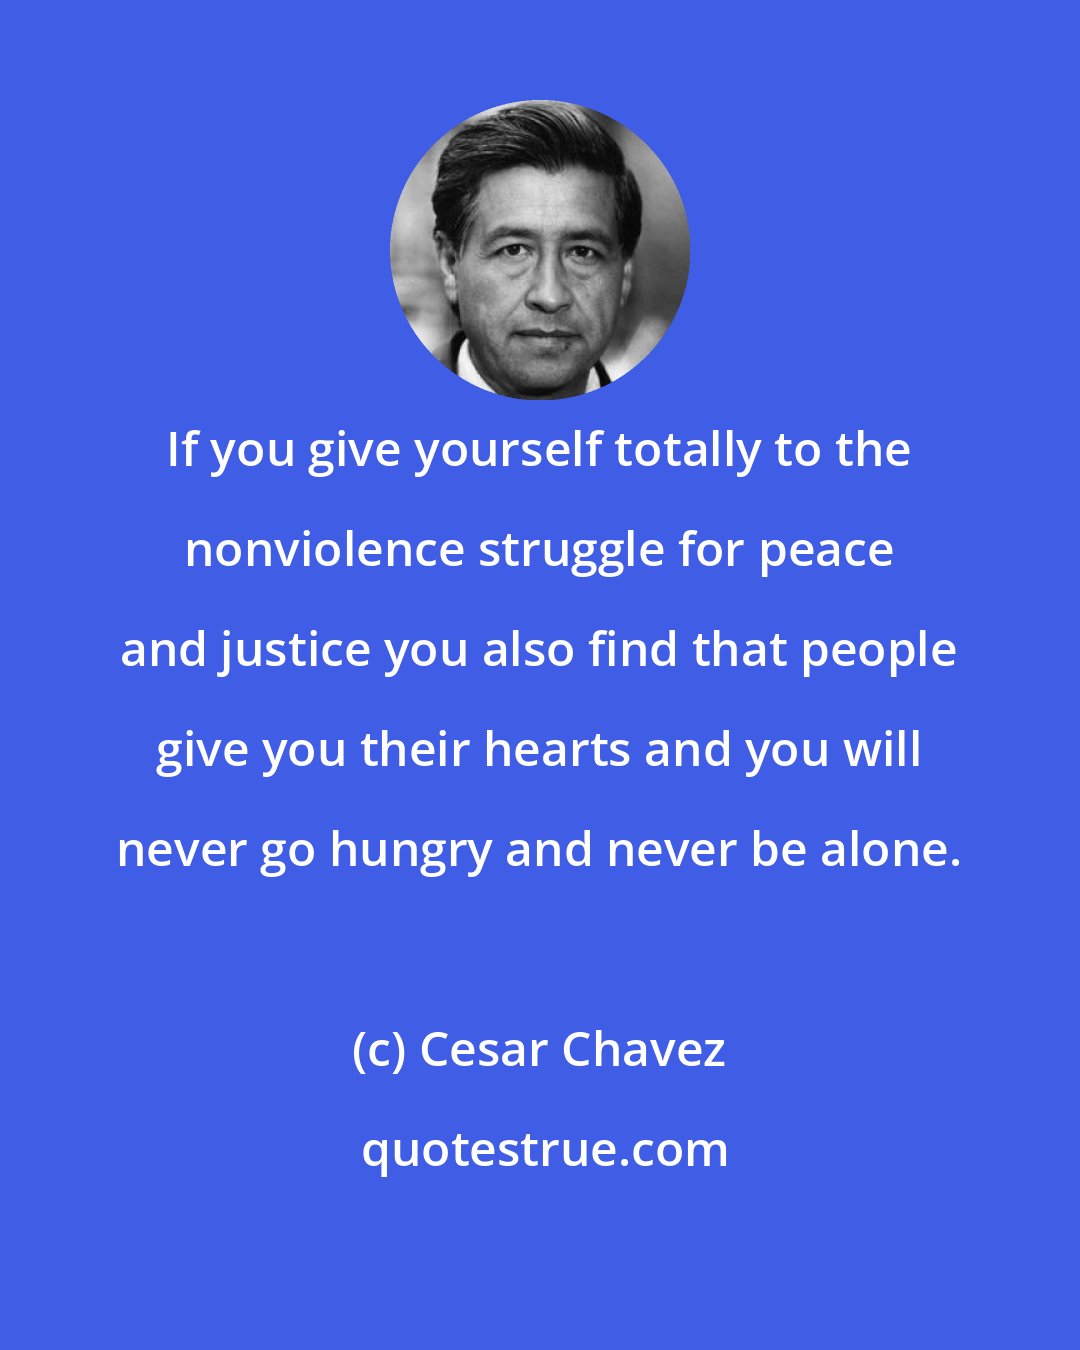 Cesar Chavez: If you give yourself totally to the nonviolence struggle for peace and justice you also find that people give you their hearts and you will never go hungry and never be alone.